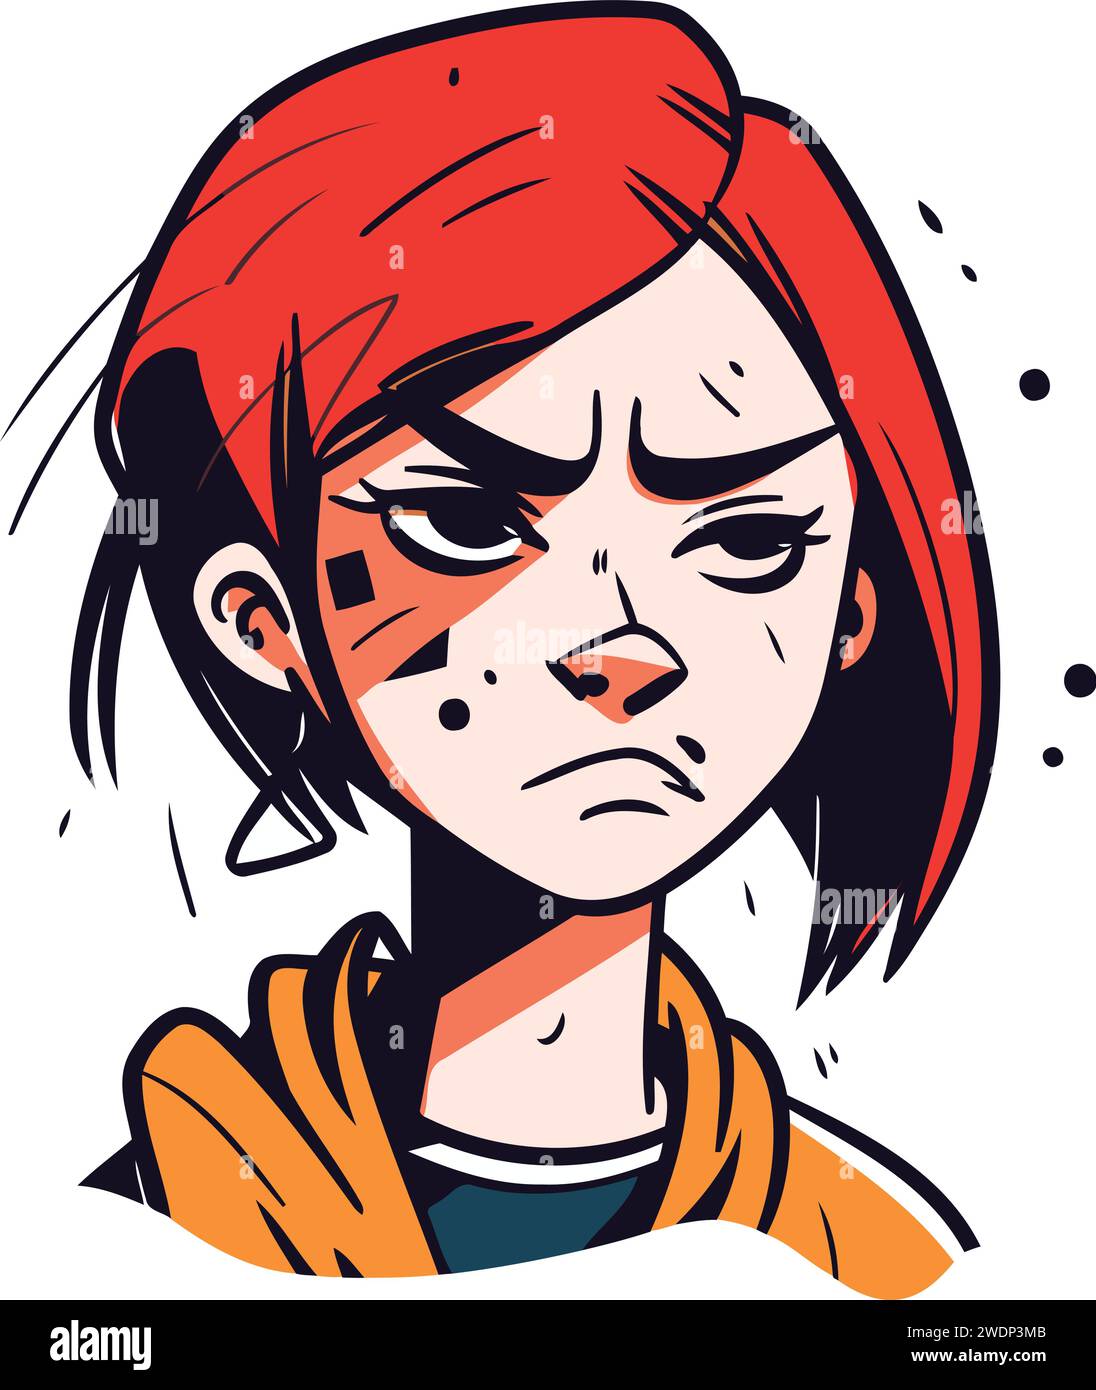 Vector illustration of a sad girl with red hair in a yellow raincoat. Stock Vector